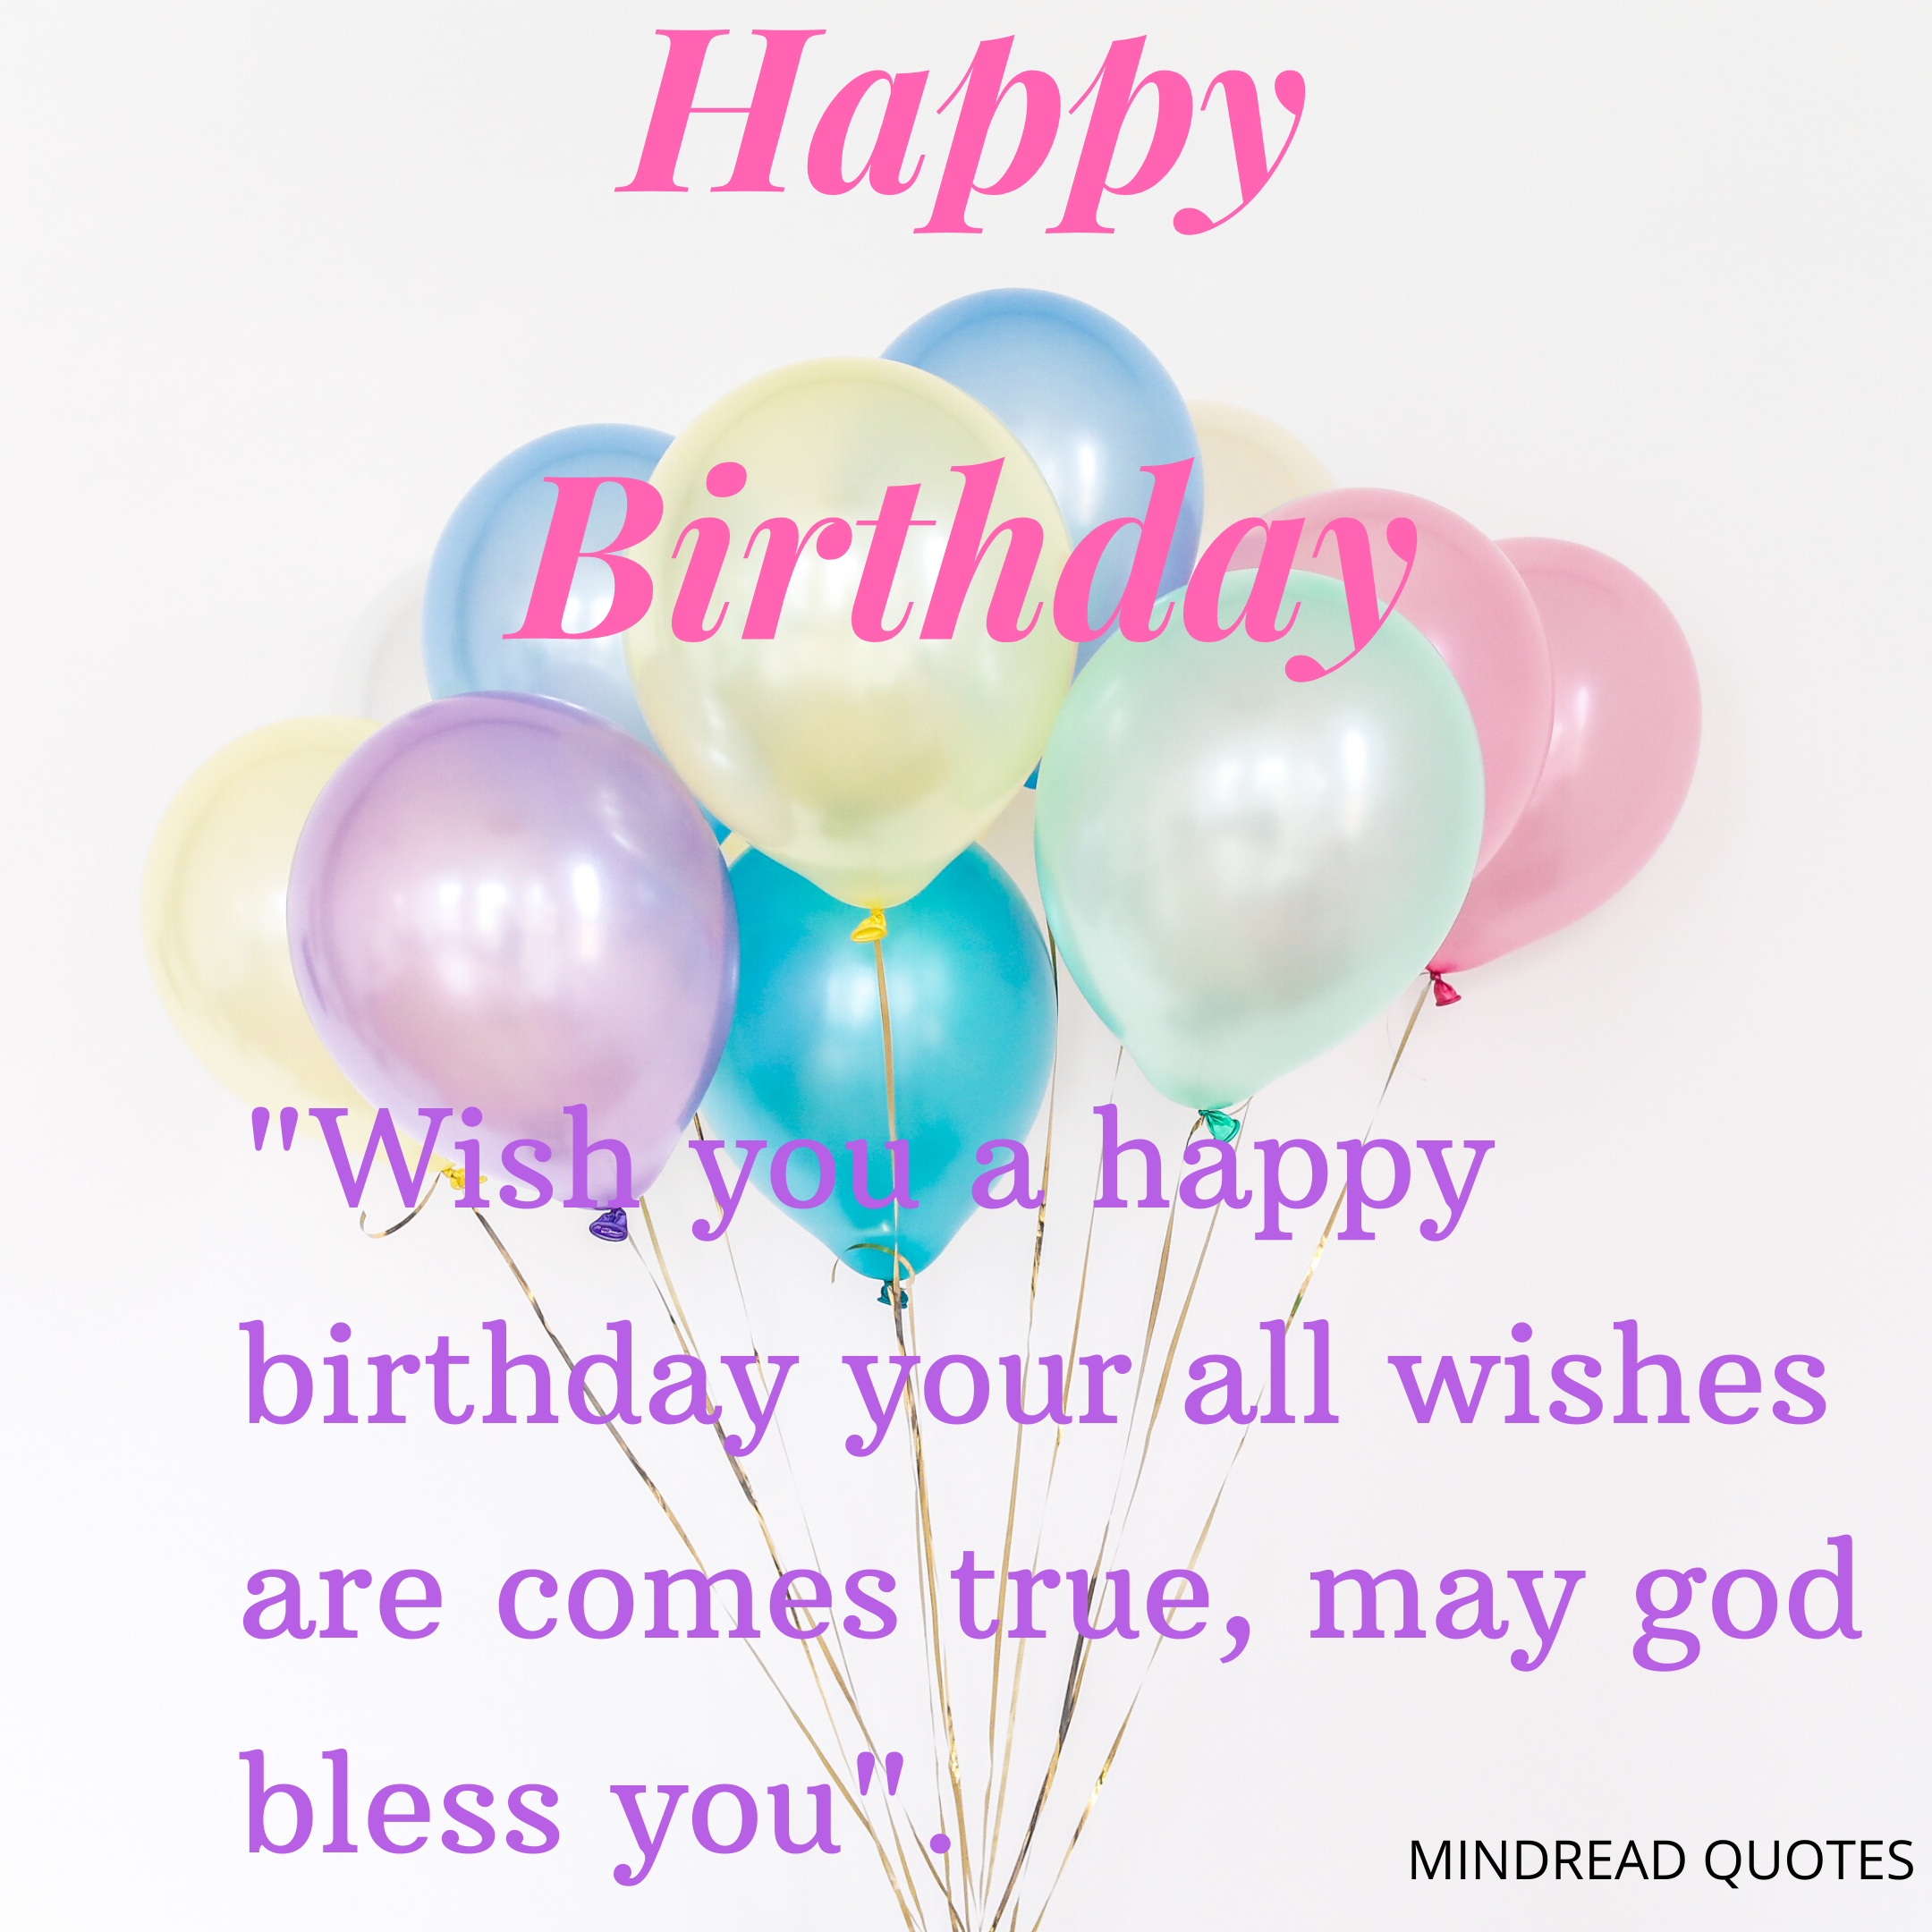 Happy Birthday wishes and quotes